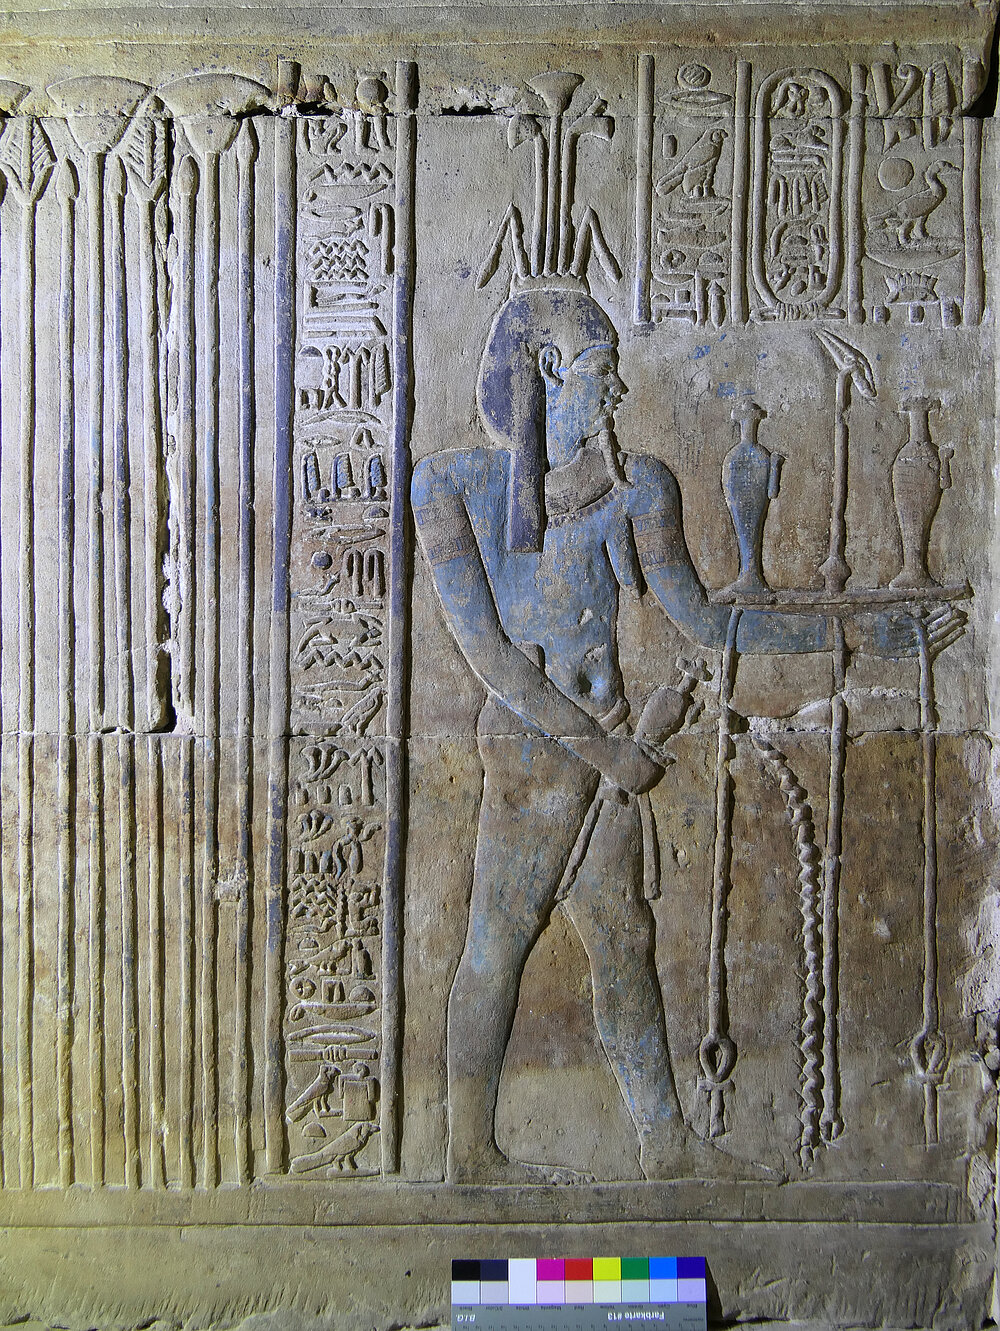 Restored scene in the soubassement of the barque sanctuary: personification of the Nile flood. 